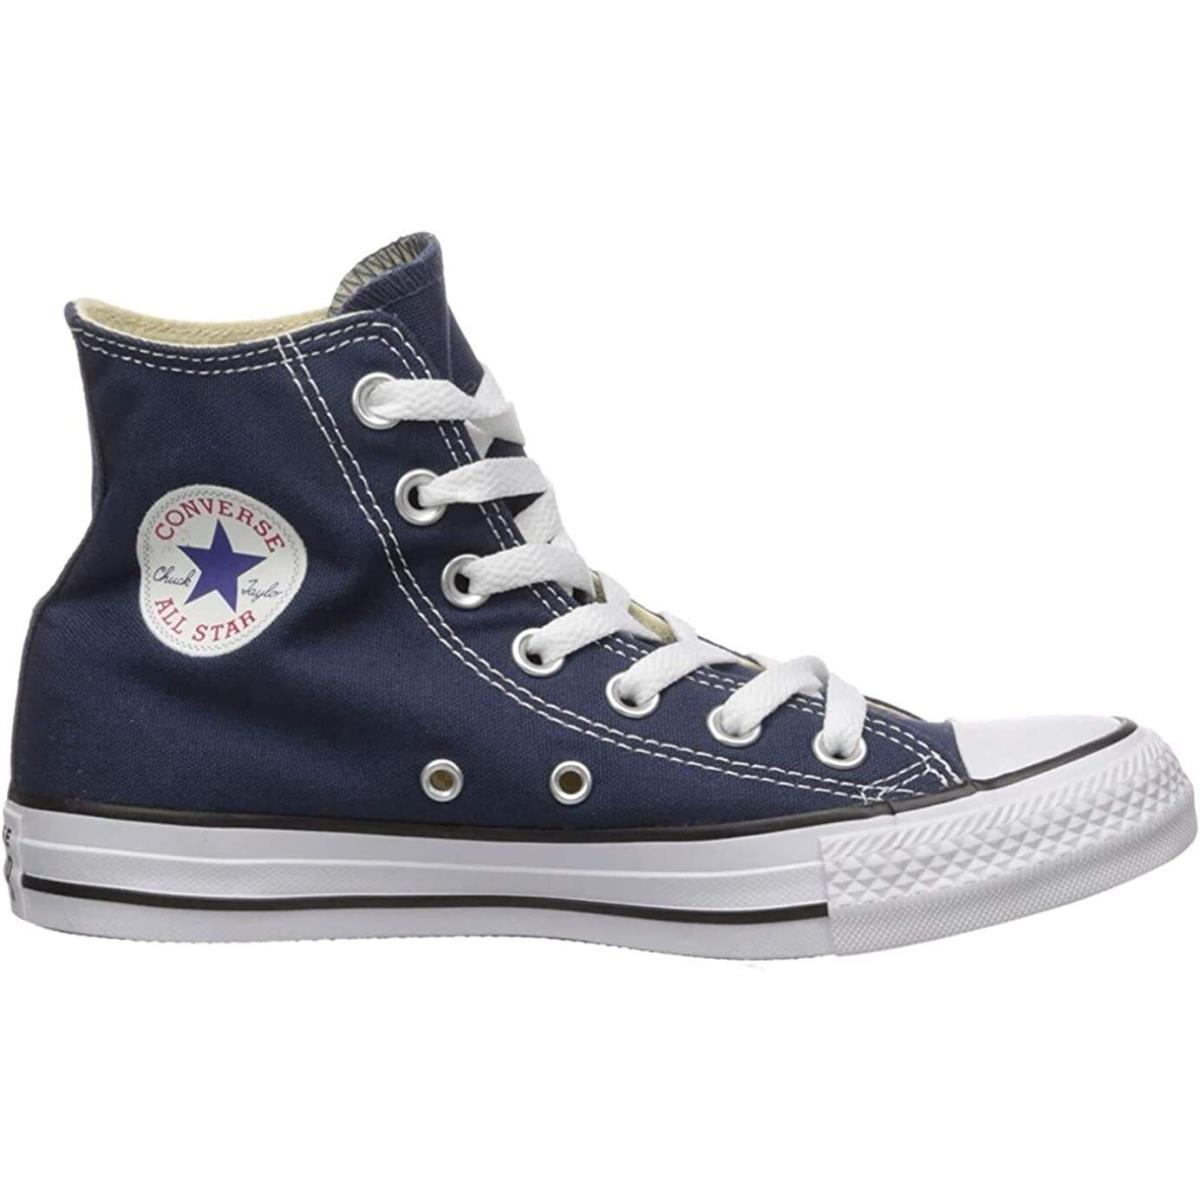 Converse Chuck Taylor All Star High Top Unisex Canvas Sneaker Classic Shoes Navy